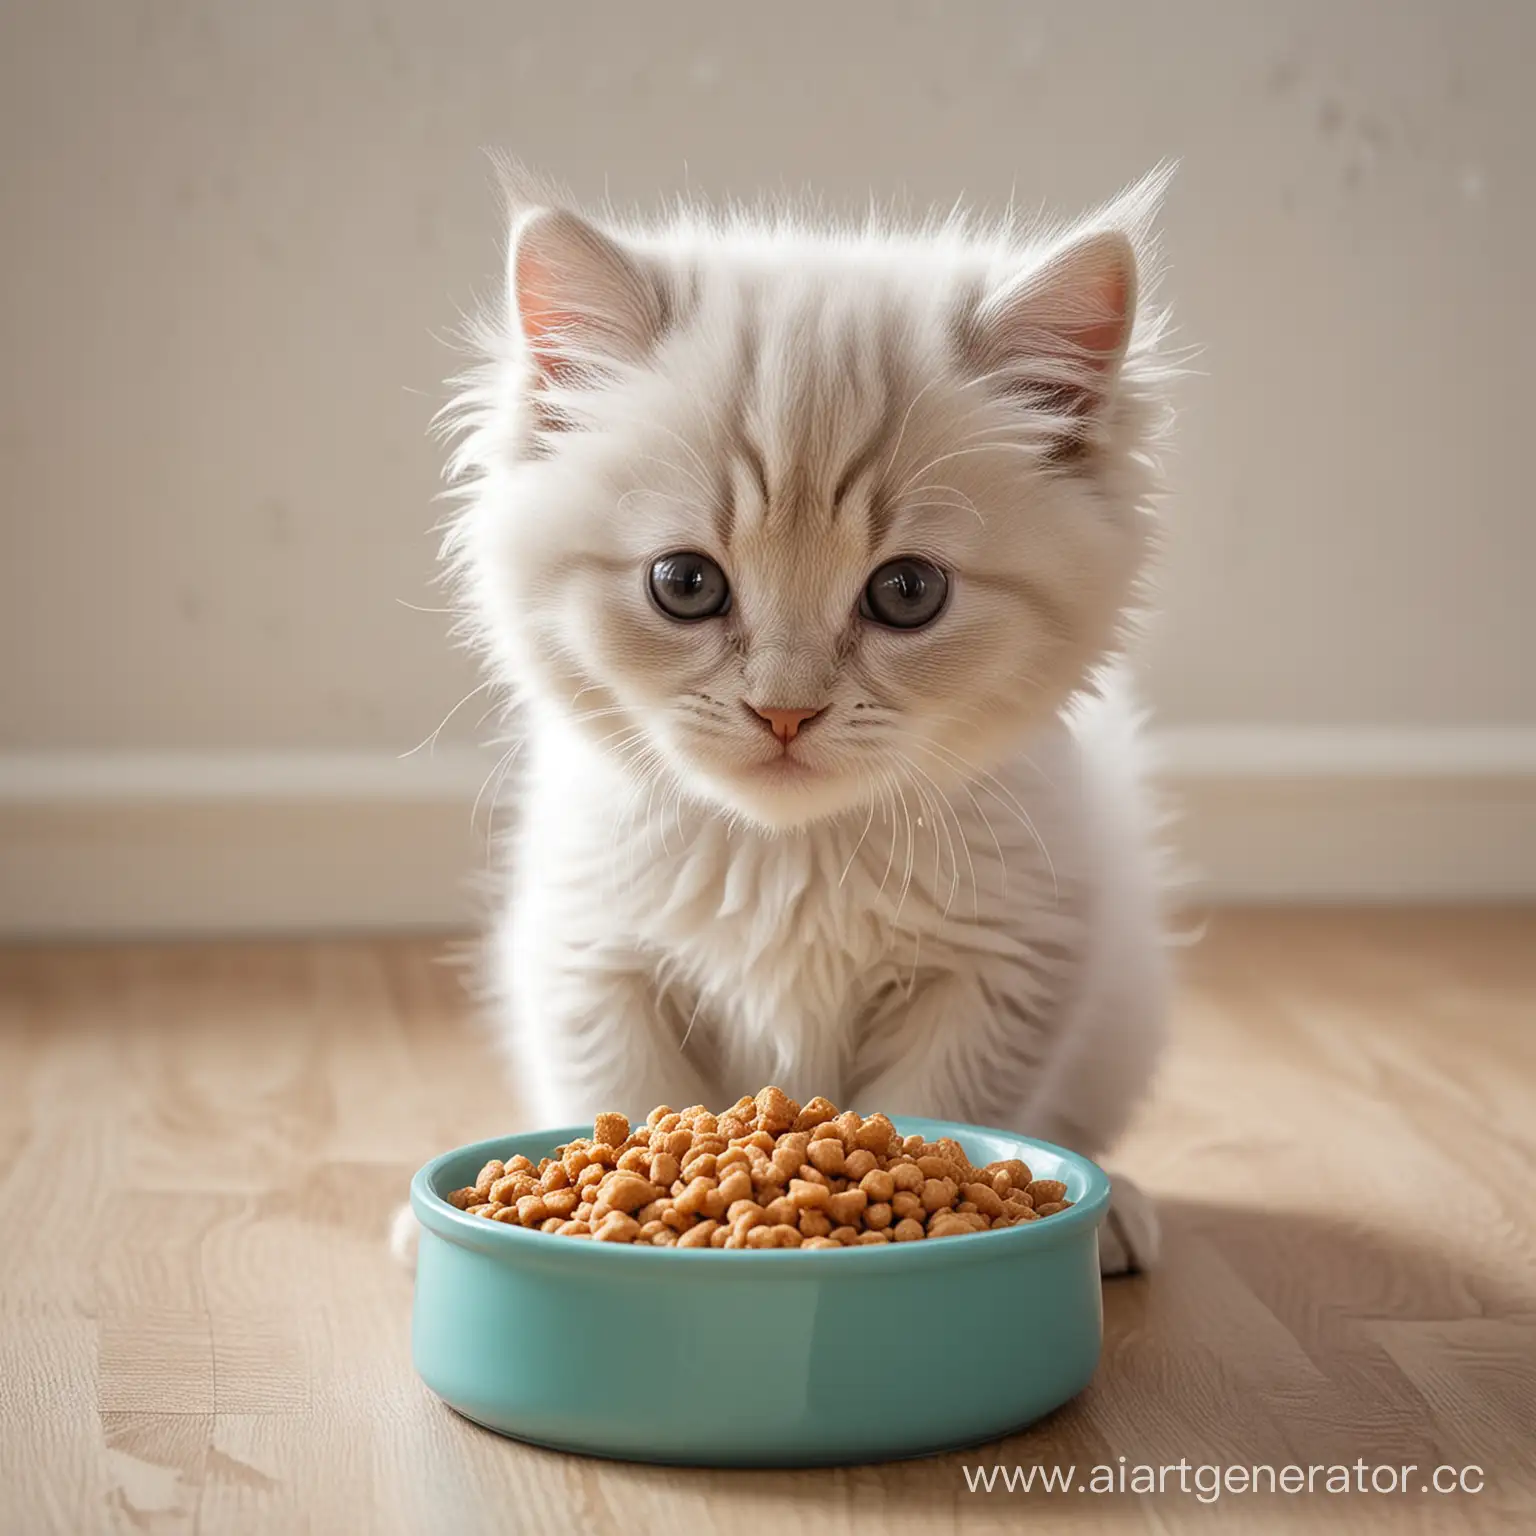 Adorable-Fluffy-Kitten-Eating-Cat-Food-from-Bowl